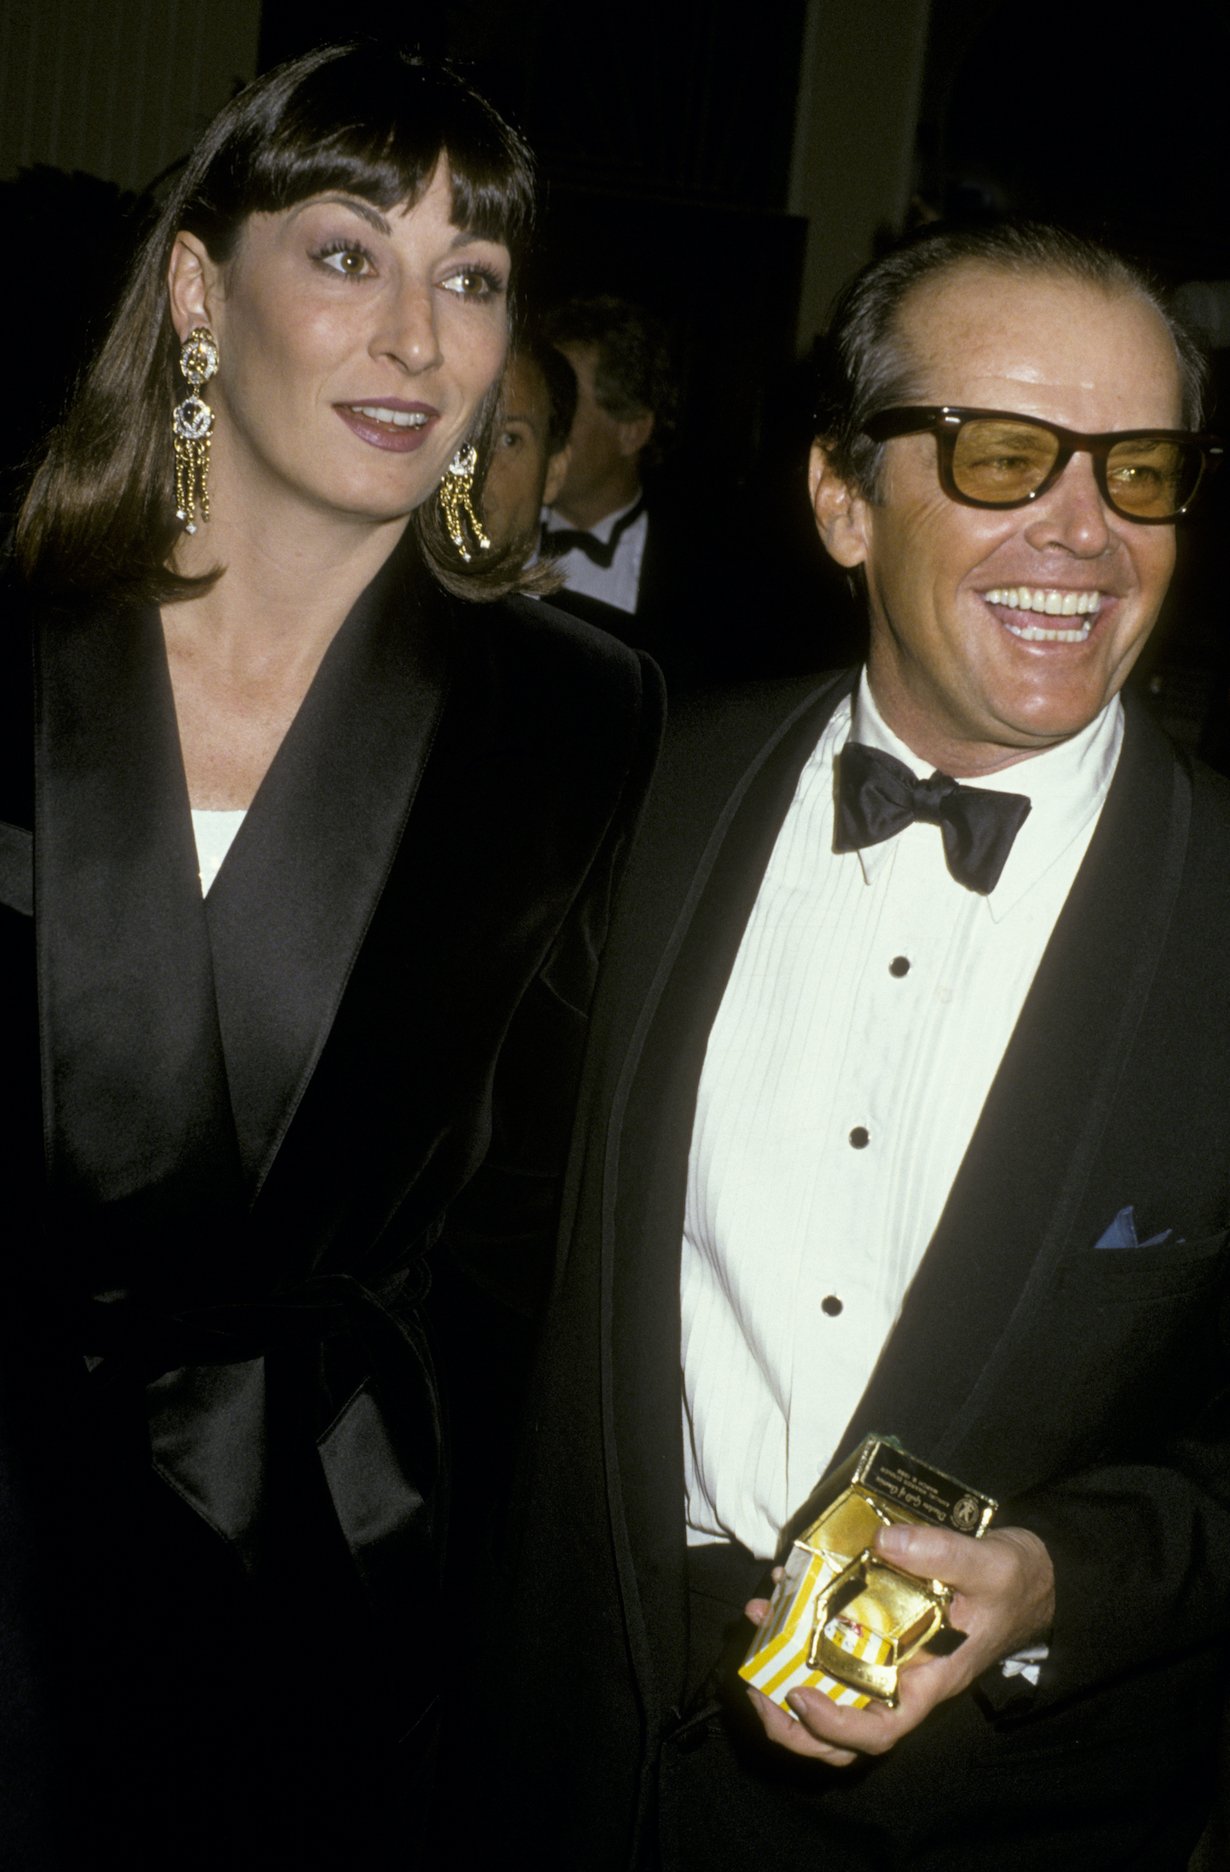 Jack Nicholson and Anjelica Huston attend 38th Annual Director's Guild of America Awards on March 8, 1986